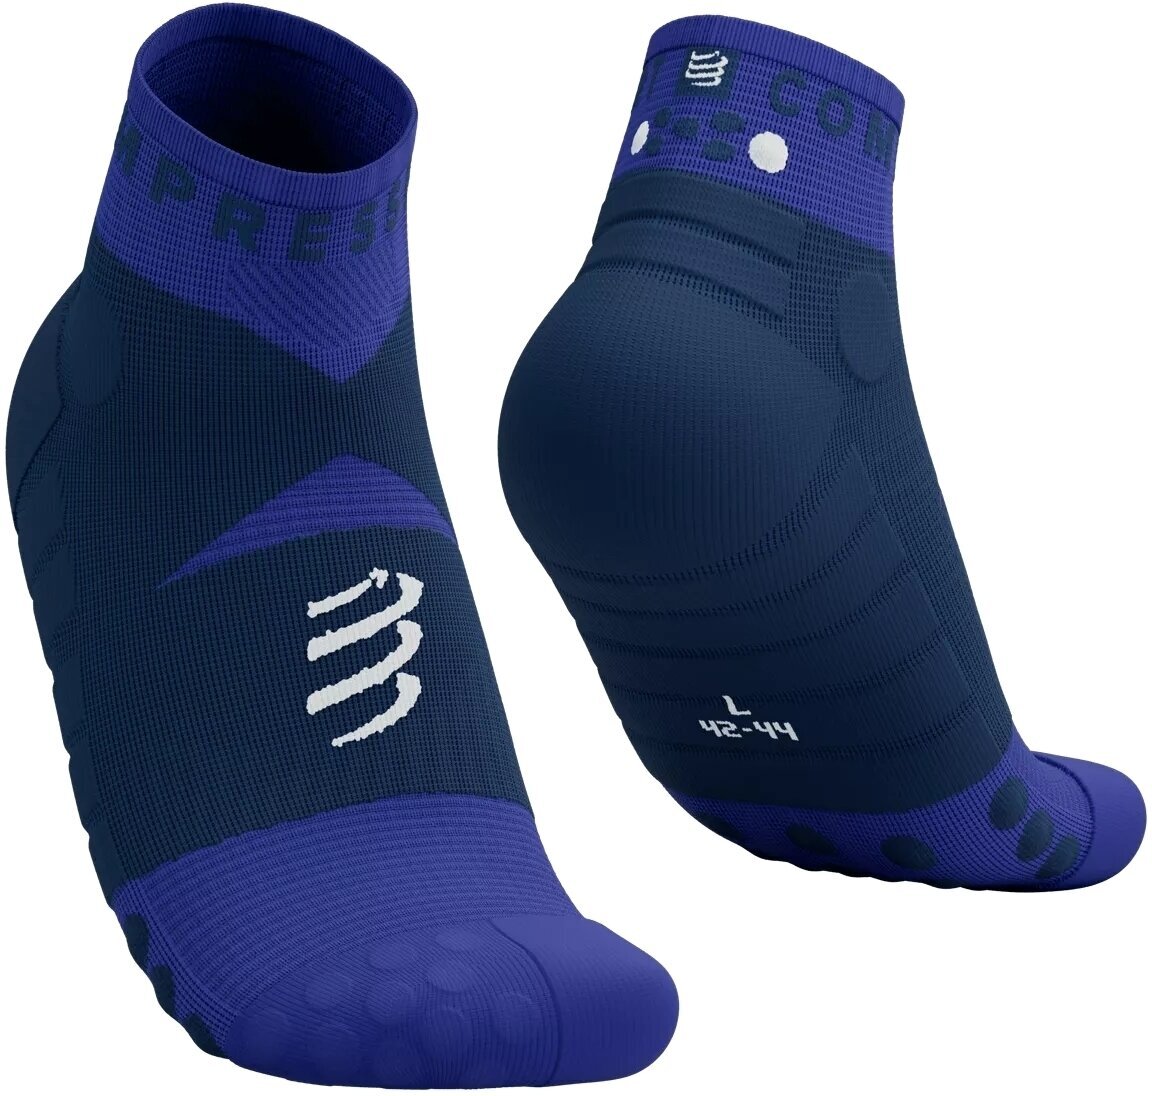 Calcetines para correr Compressport Ultra Trail Low Socks Dazzling Blue/Dress Blues/White T1 Calcetines para correr